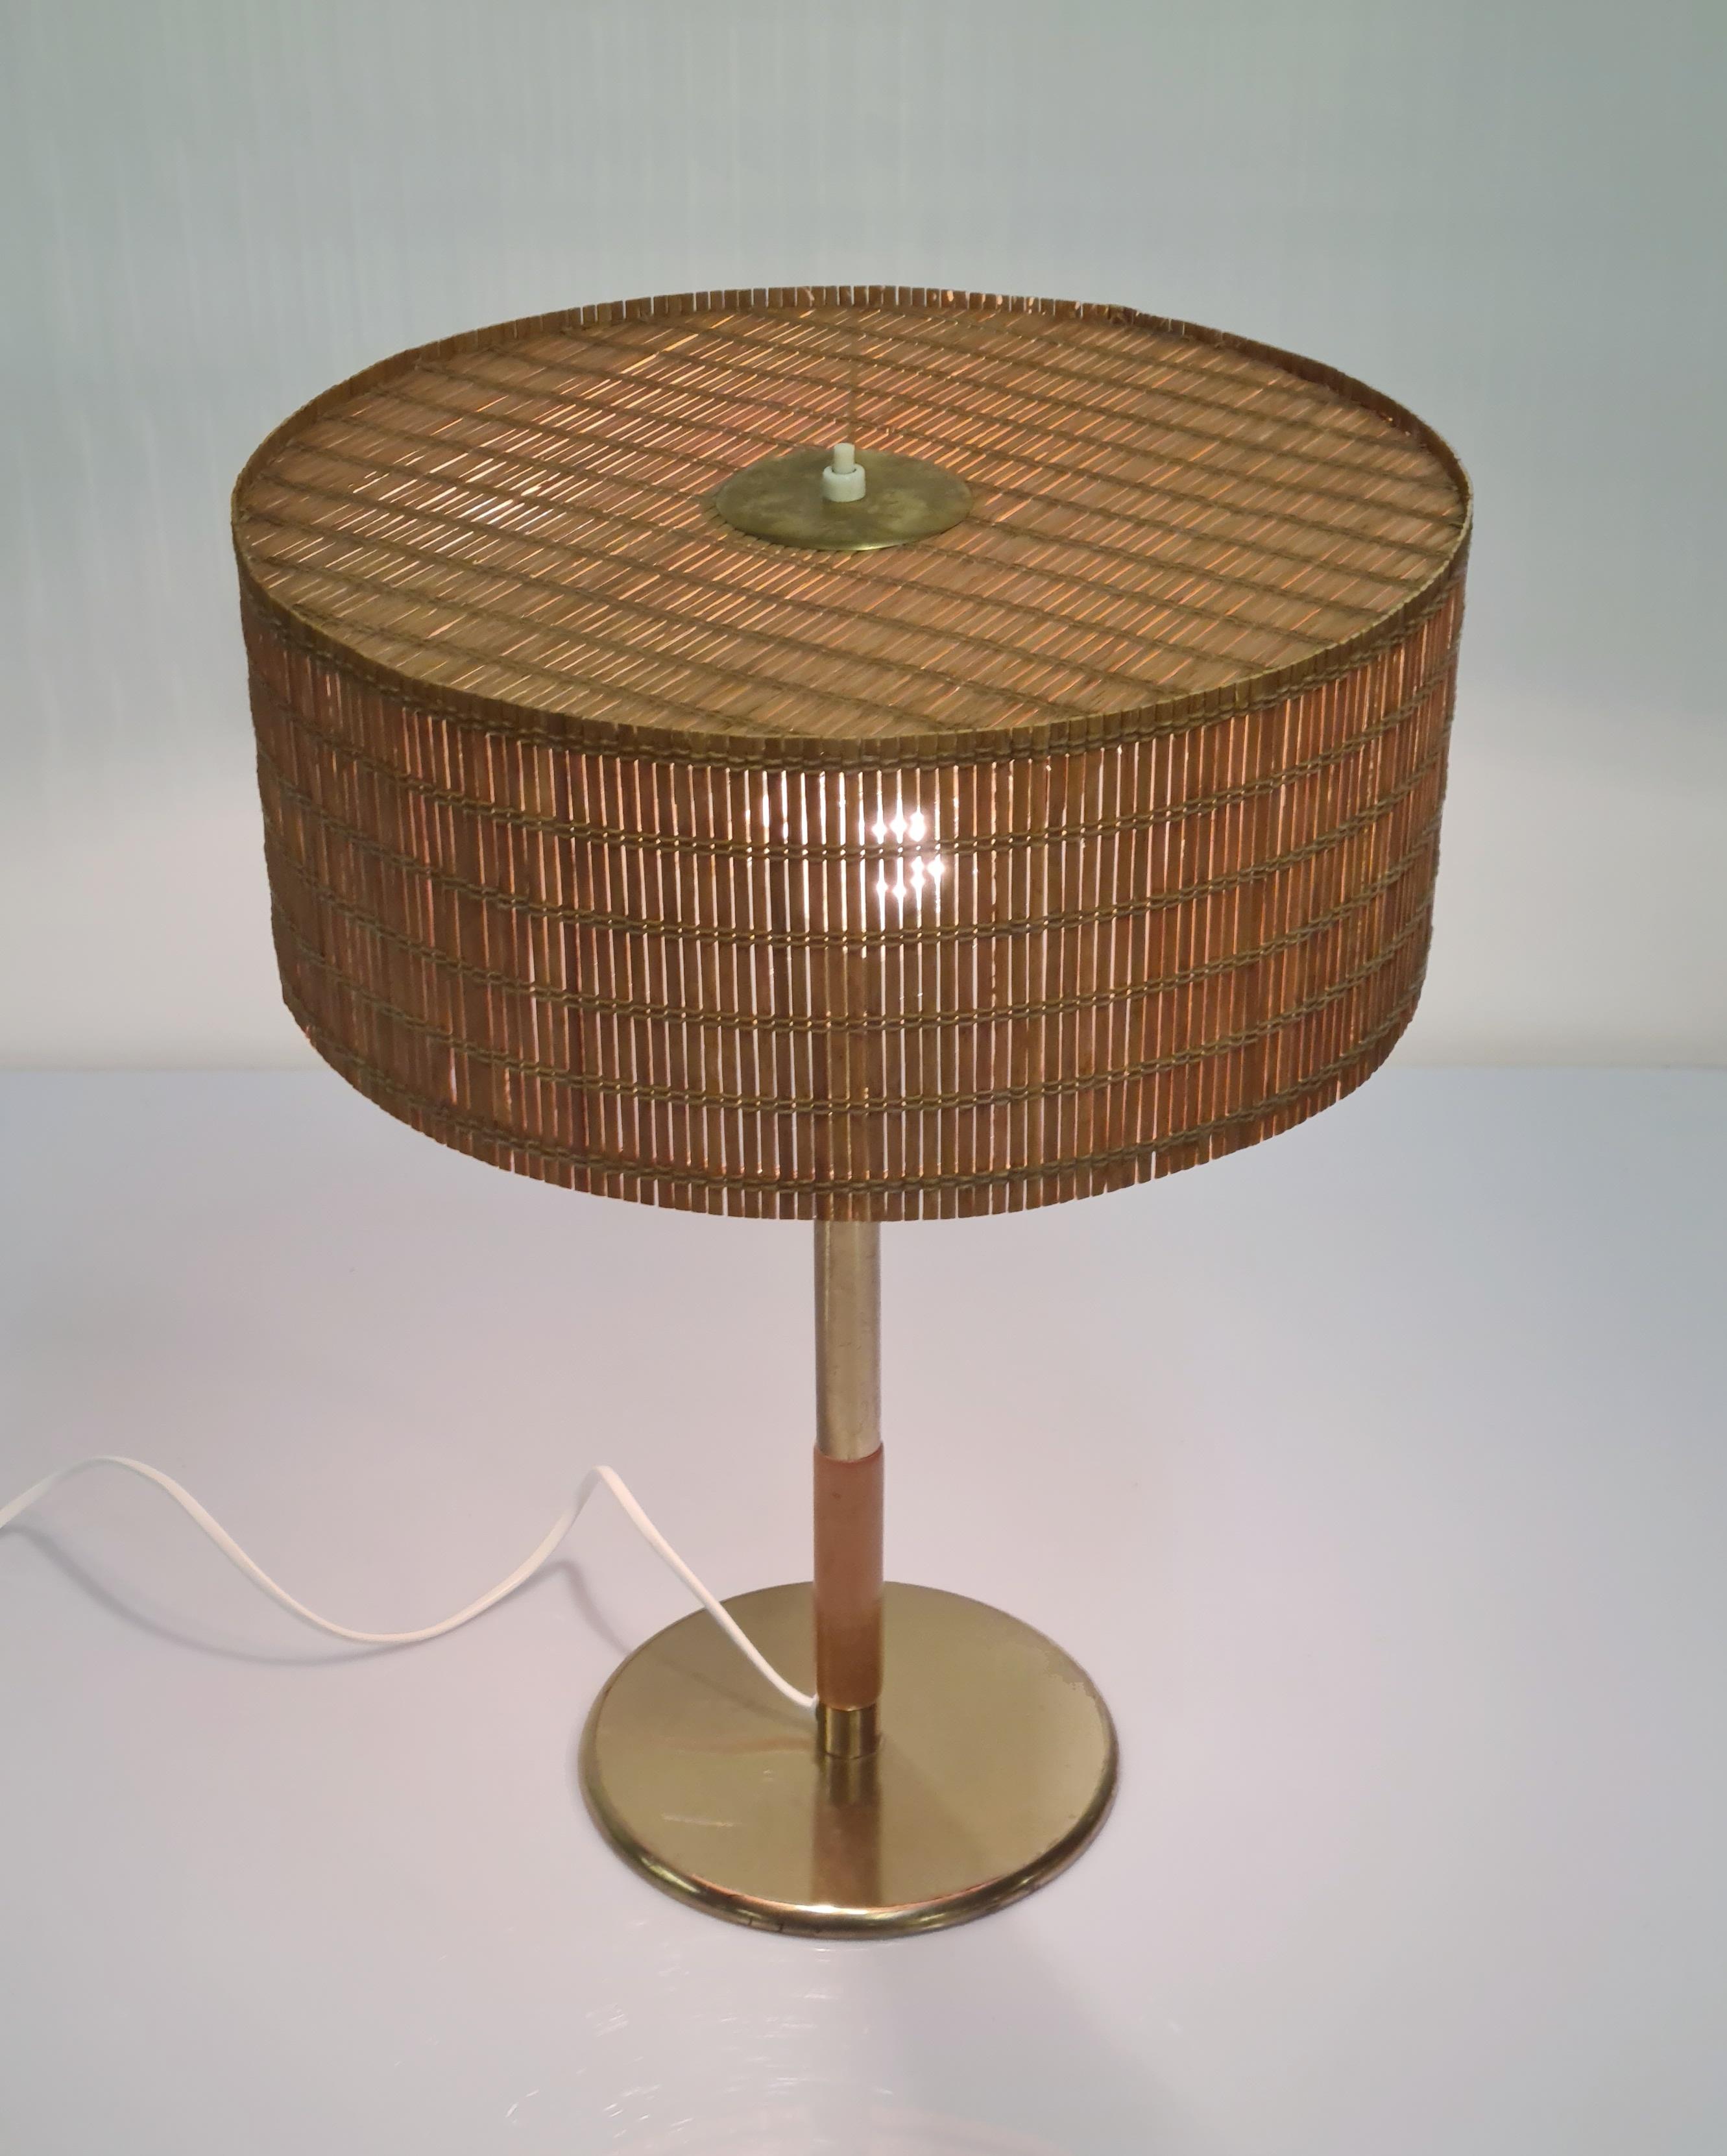 Paavo Tynell table lamp model 5068, manufactured by Taito Oy in the 1950s, excellent condition. One of the more rarely seen Tynell table lamp models. Please see our other items for another one of this similar model with a small variation to the